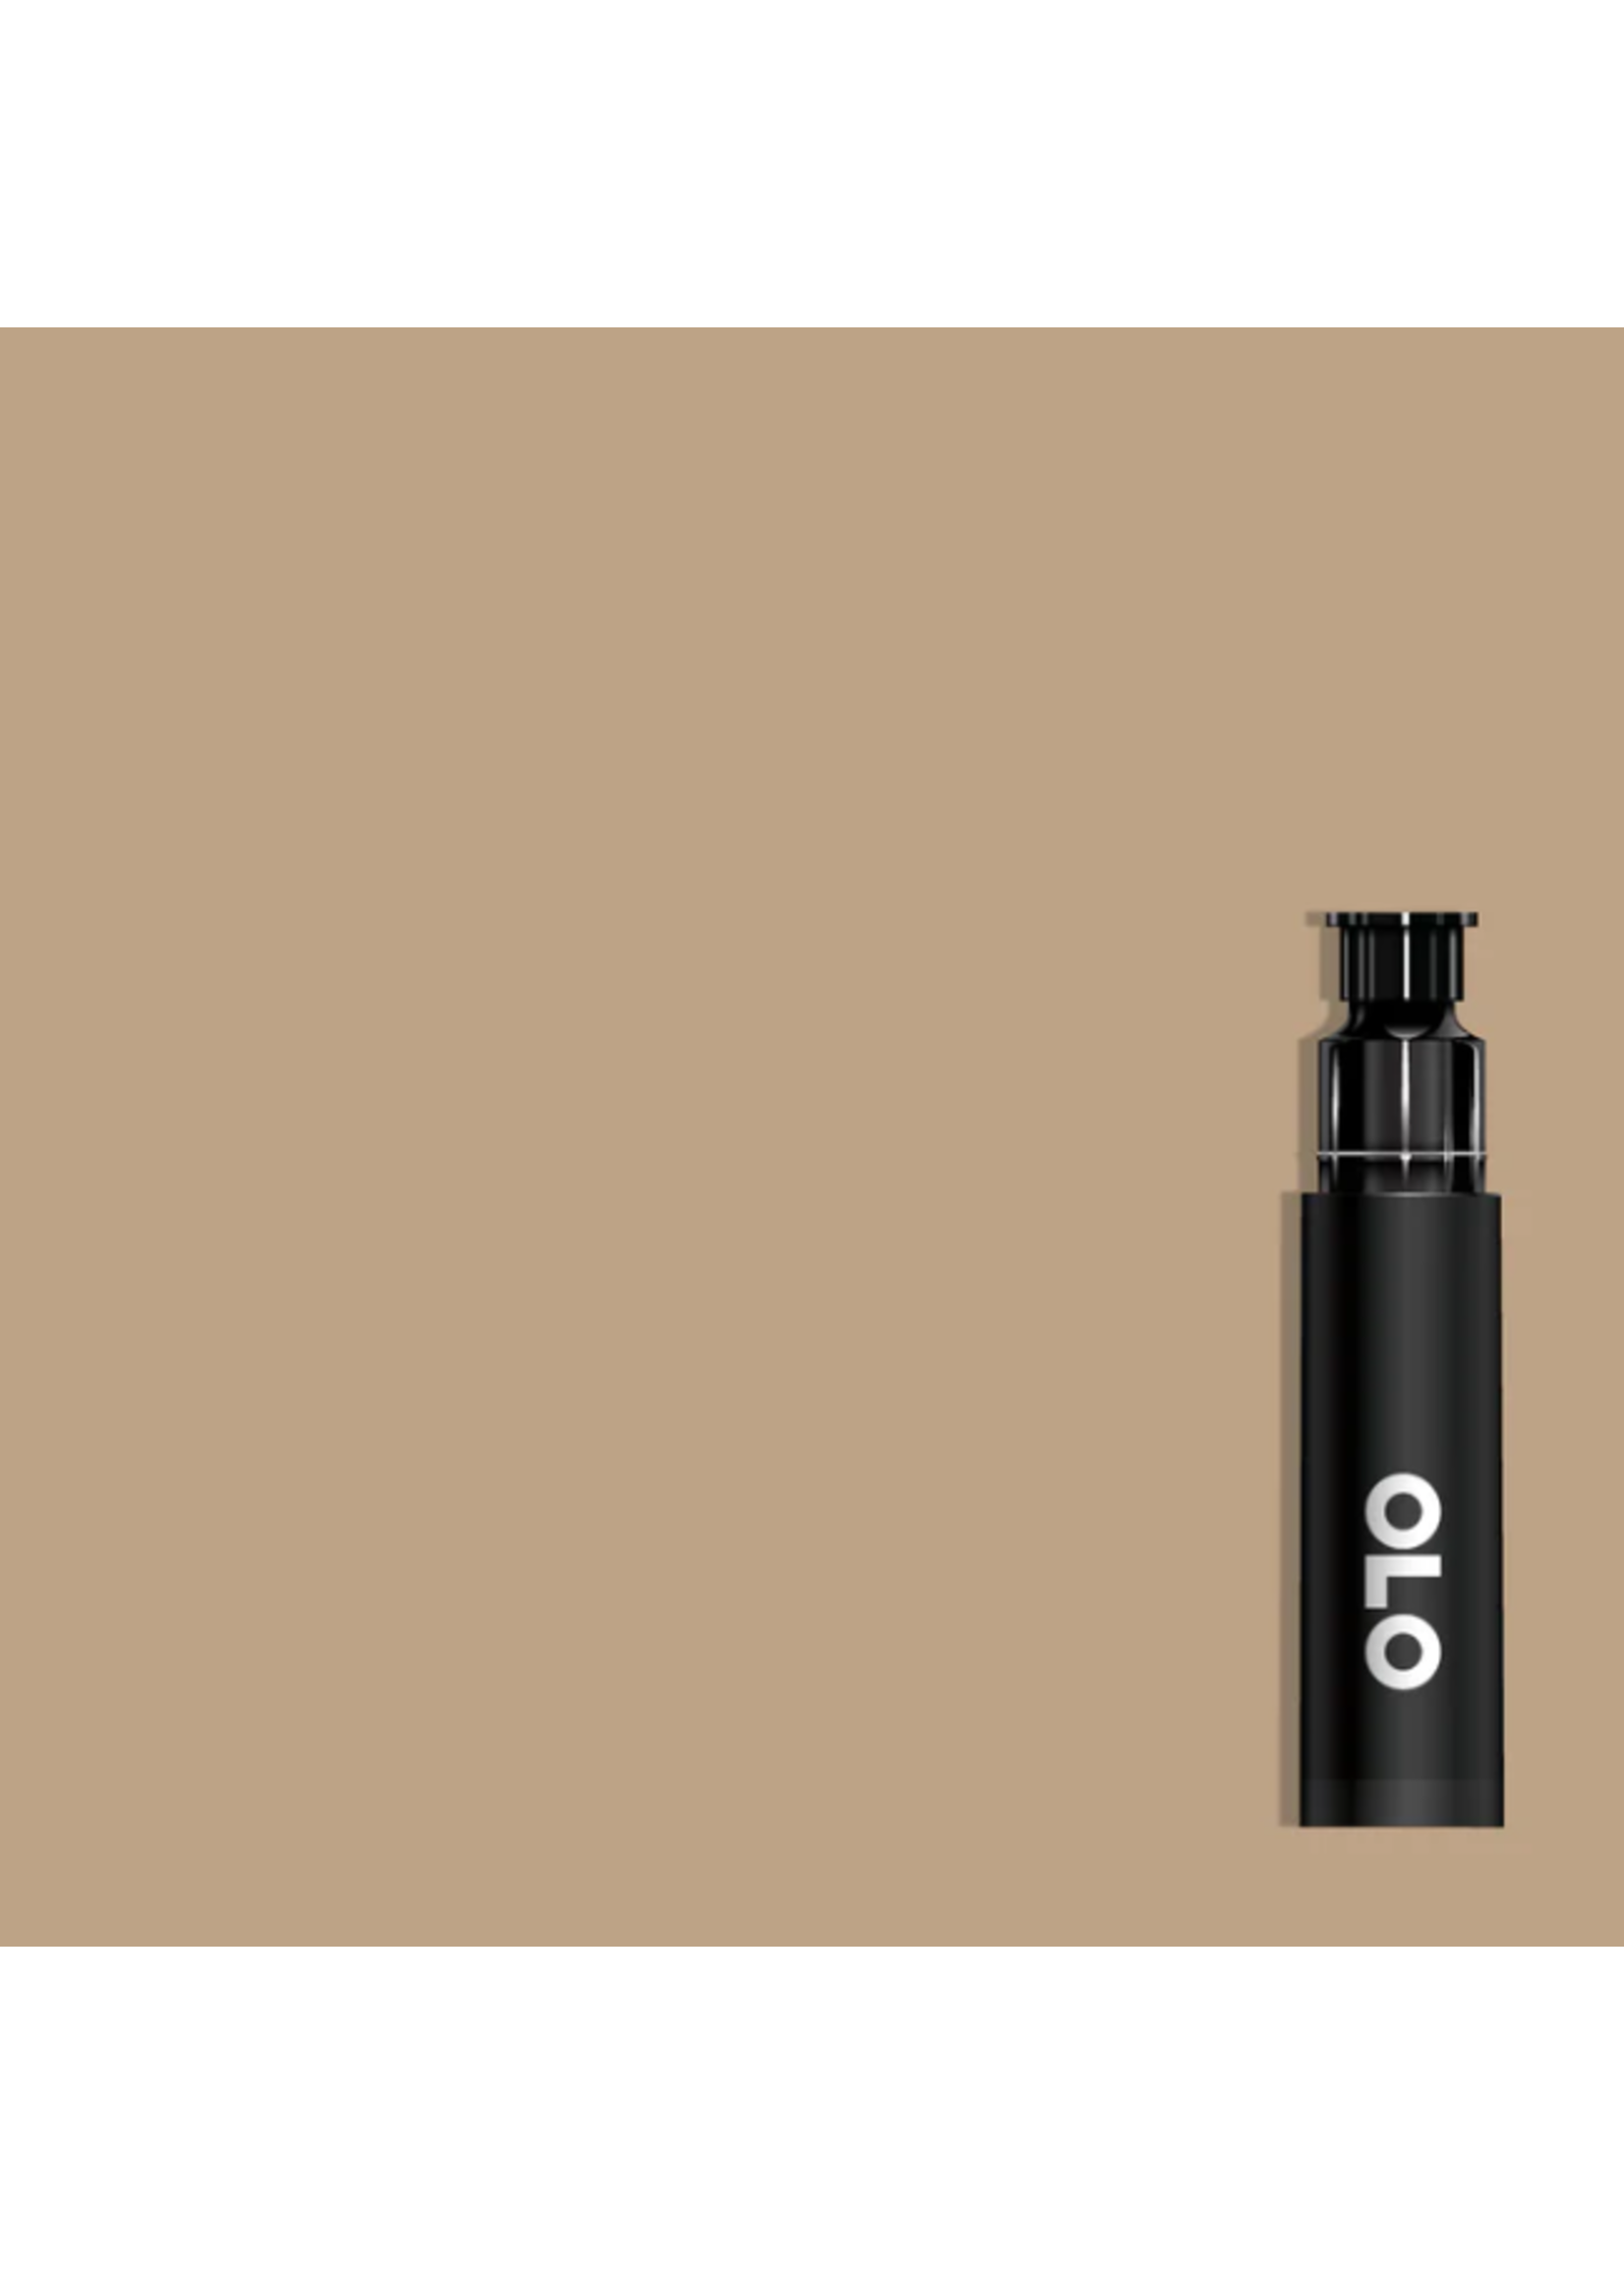 OLO OLO Brush Replacement Cartridge: Macaque